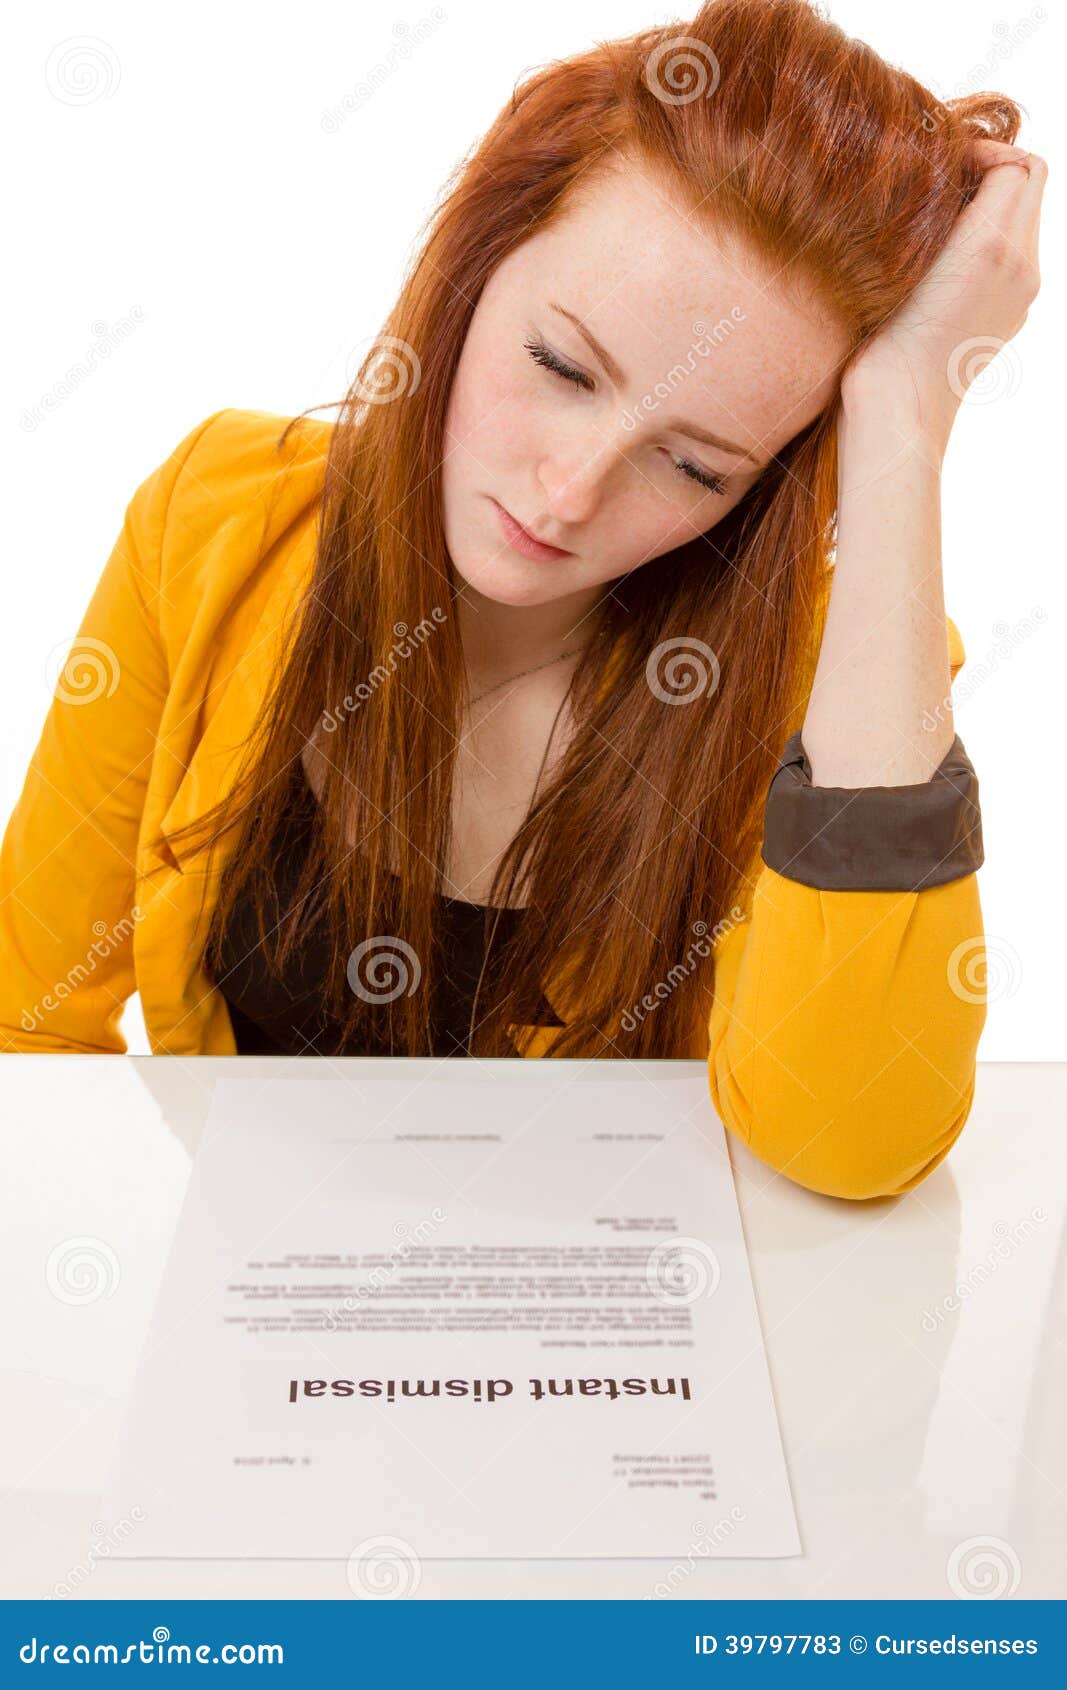 Young woman looking sad was fired from her job. 100 percent pure white background, teen girl is sad